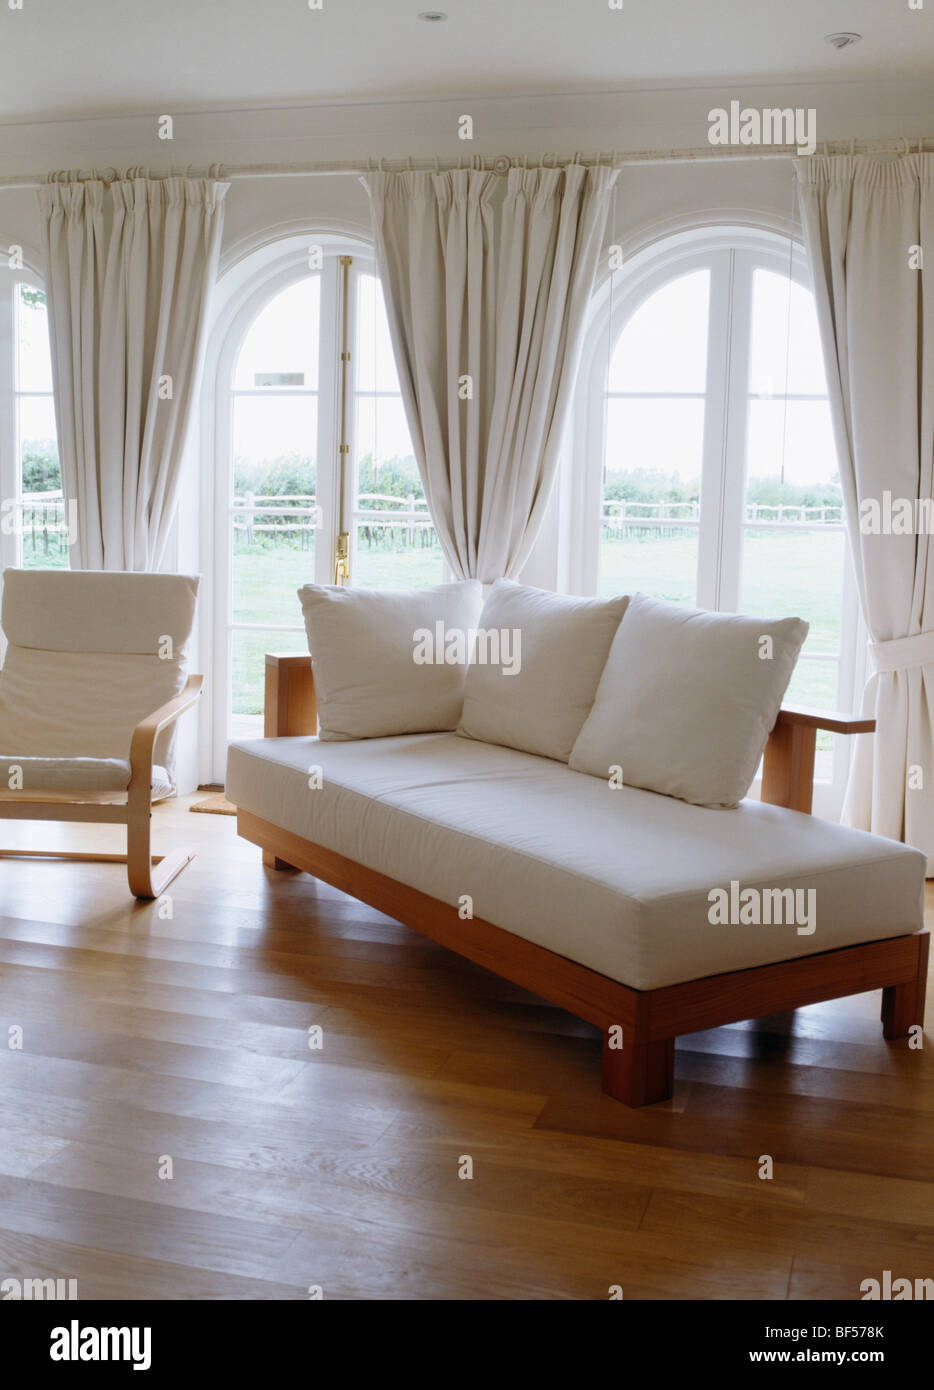 Day Bed With White Cushions In Living Room With Wooden Floor And